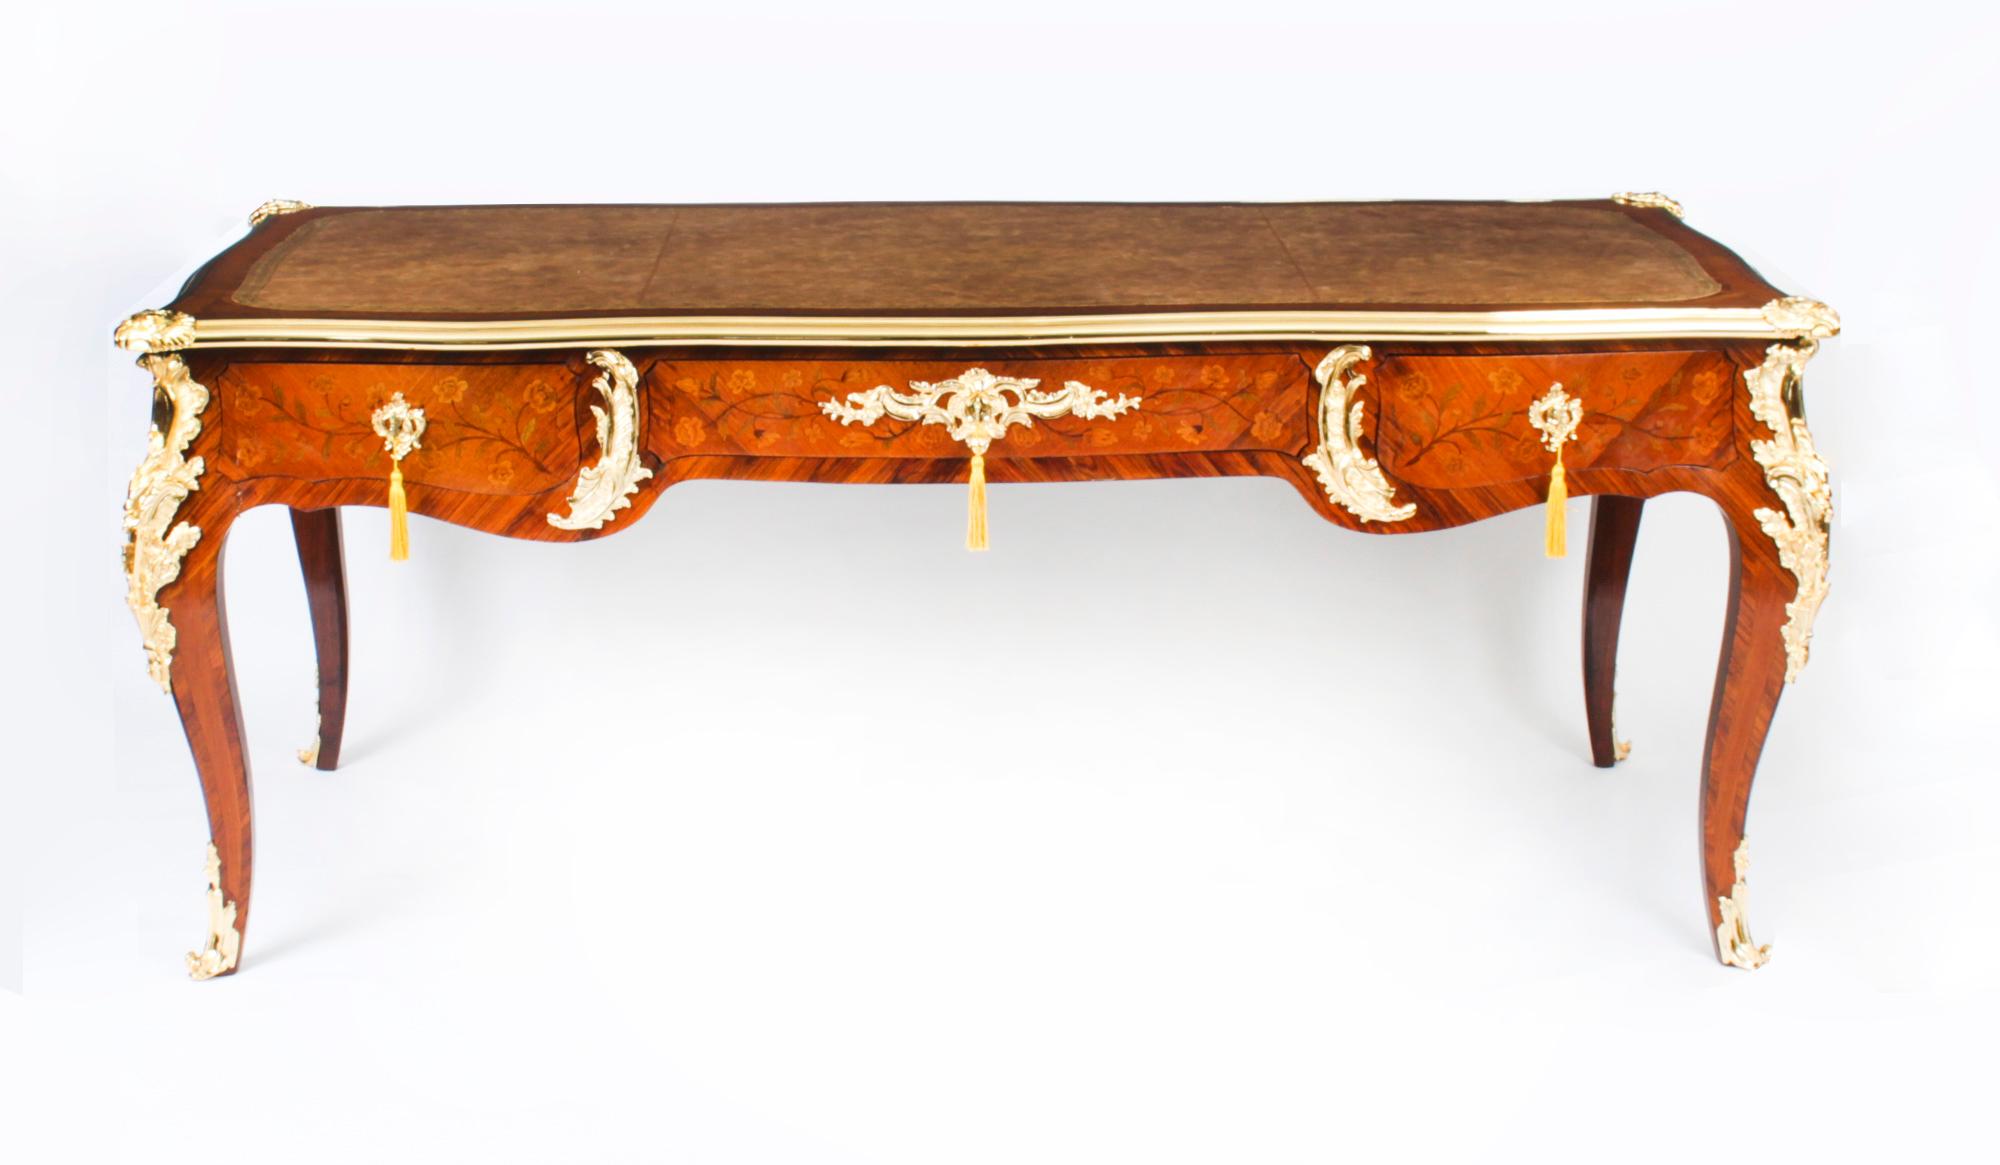 This is a fine and rare antique ormolu mounted French wood and marquetry bureau plat, Circa 1790 in date.

It has highly decorative ormolu mounts that are signed VD on the underside.

The shaped rectangular top has a decorative ormolu border